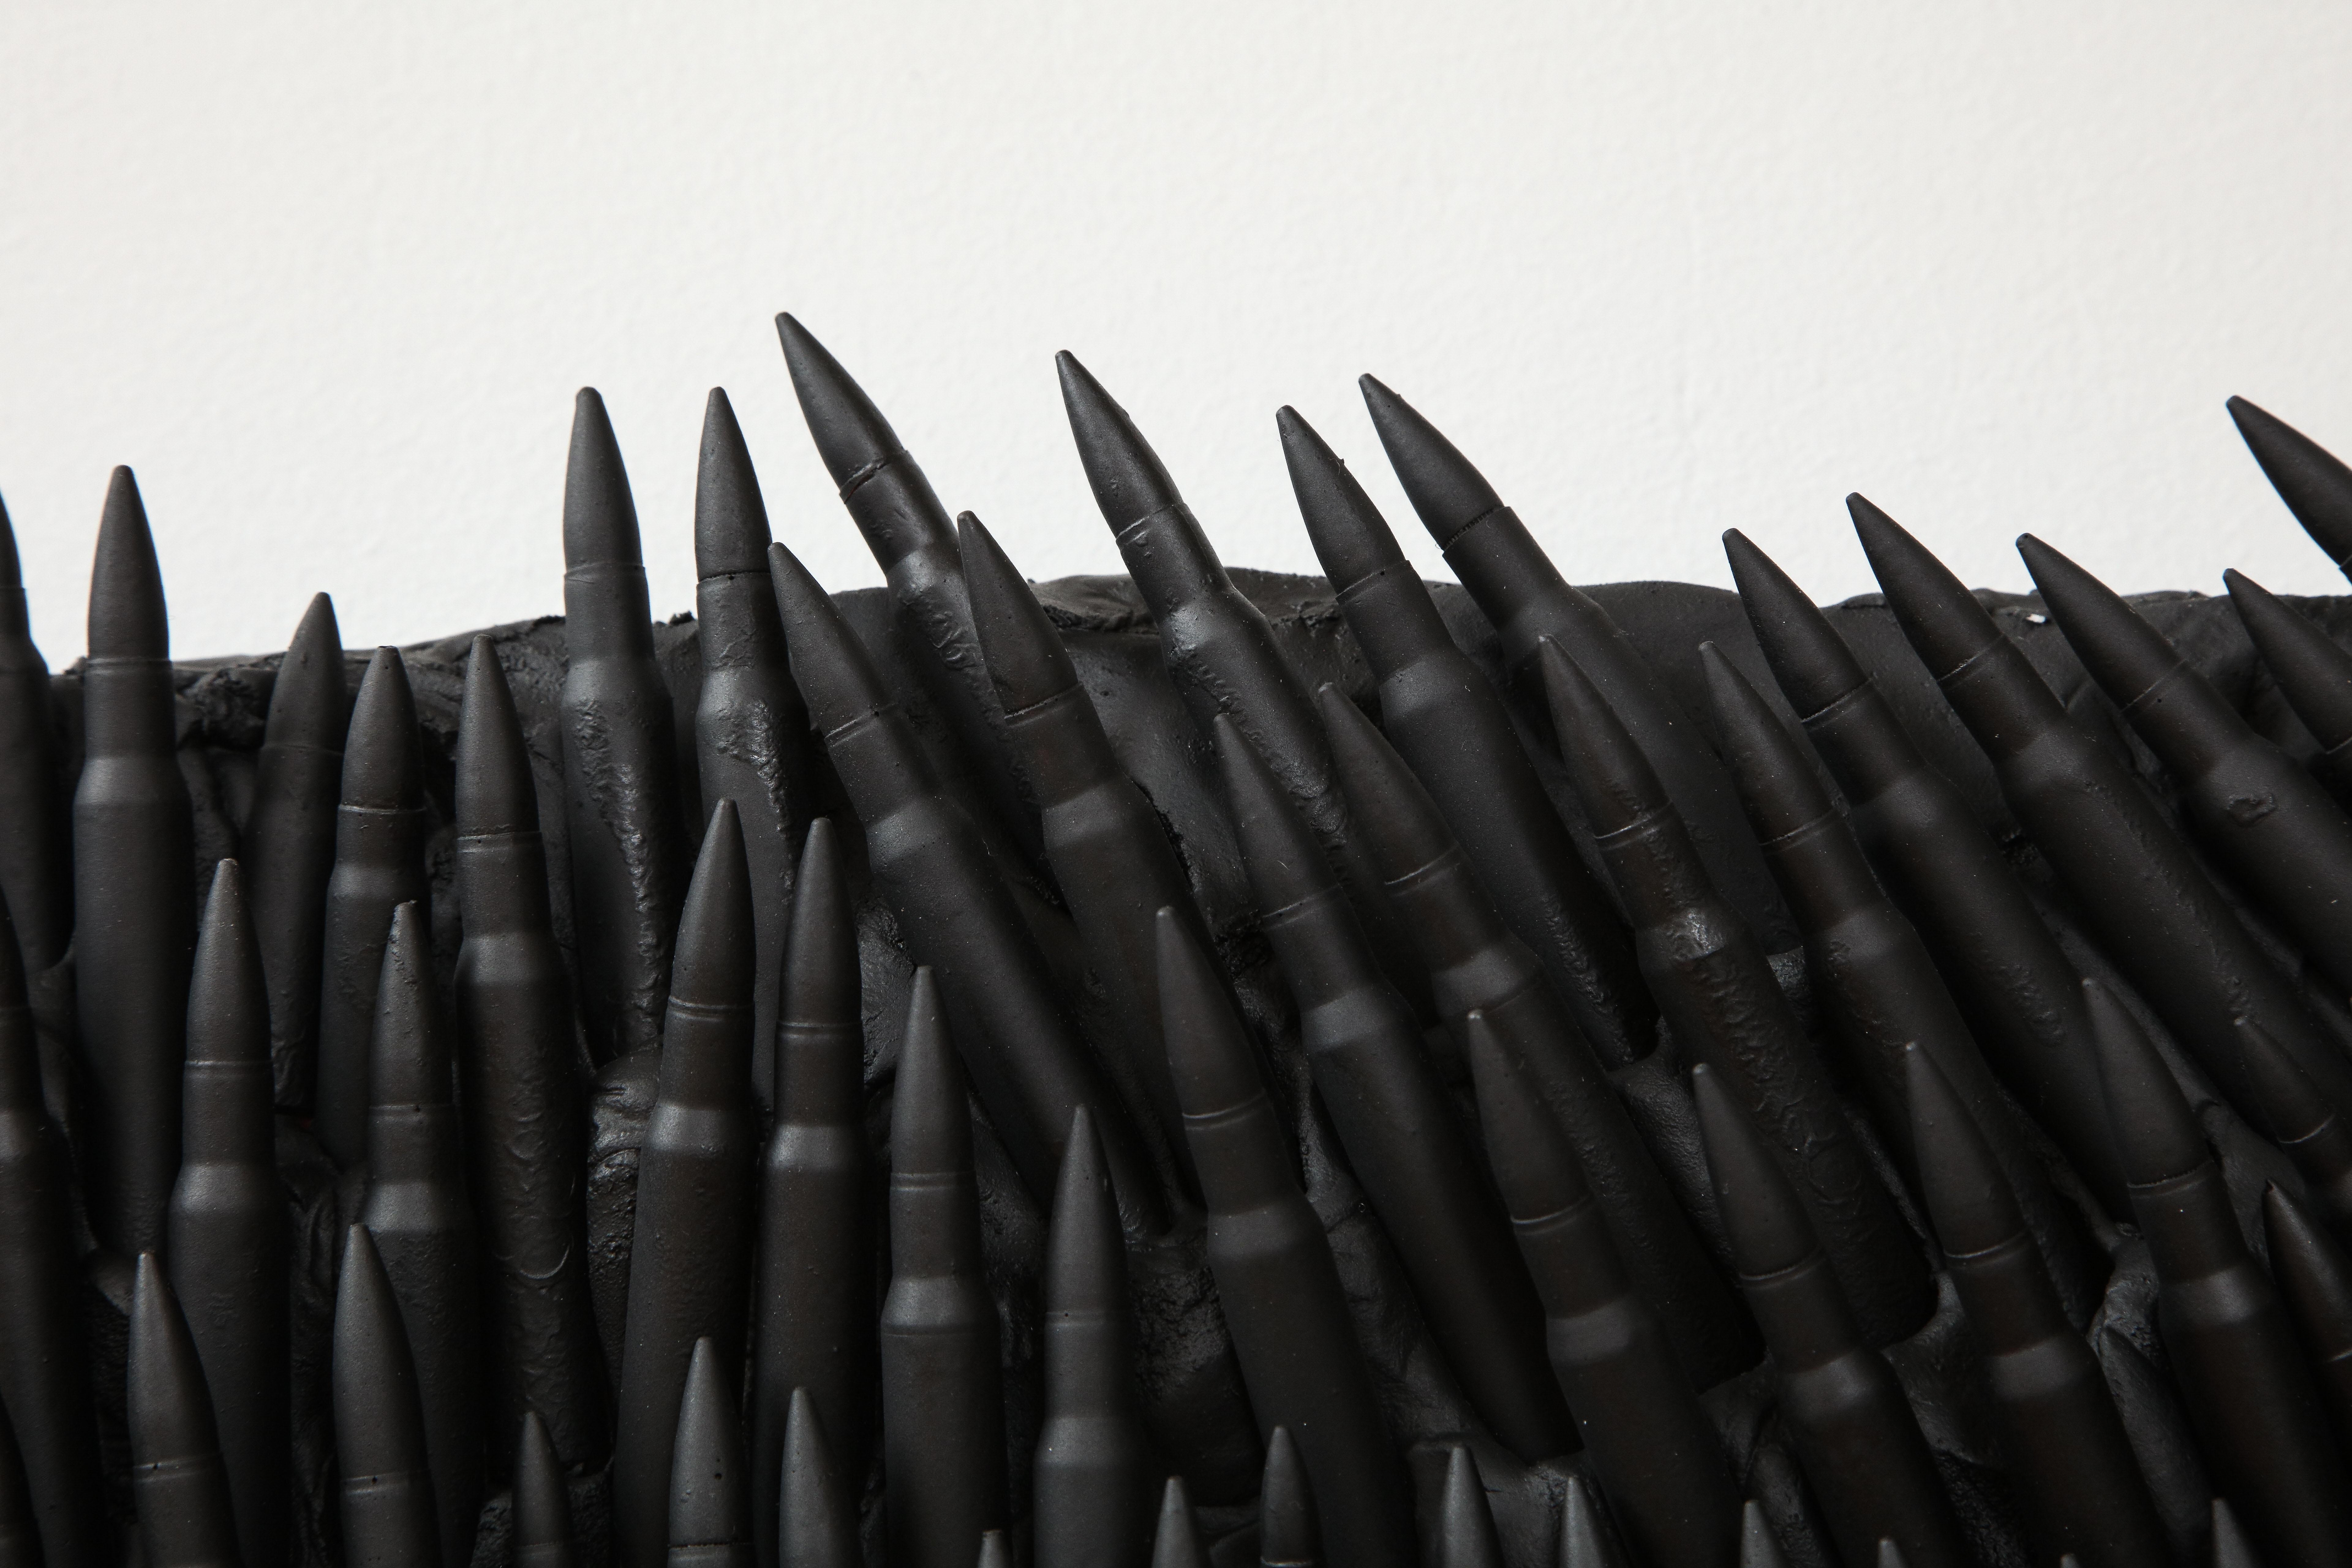 Untitled, Will Ryman, 2013, Bullets Cast in Resin 3